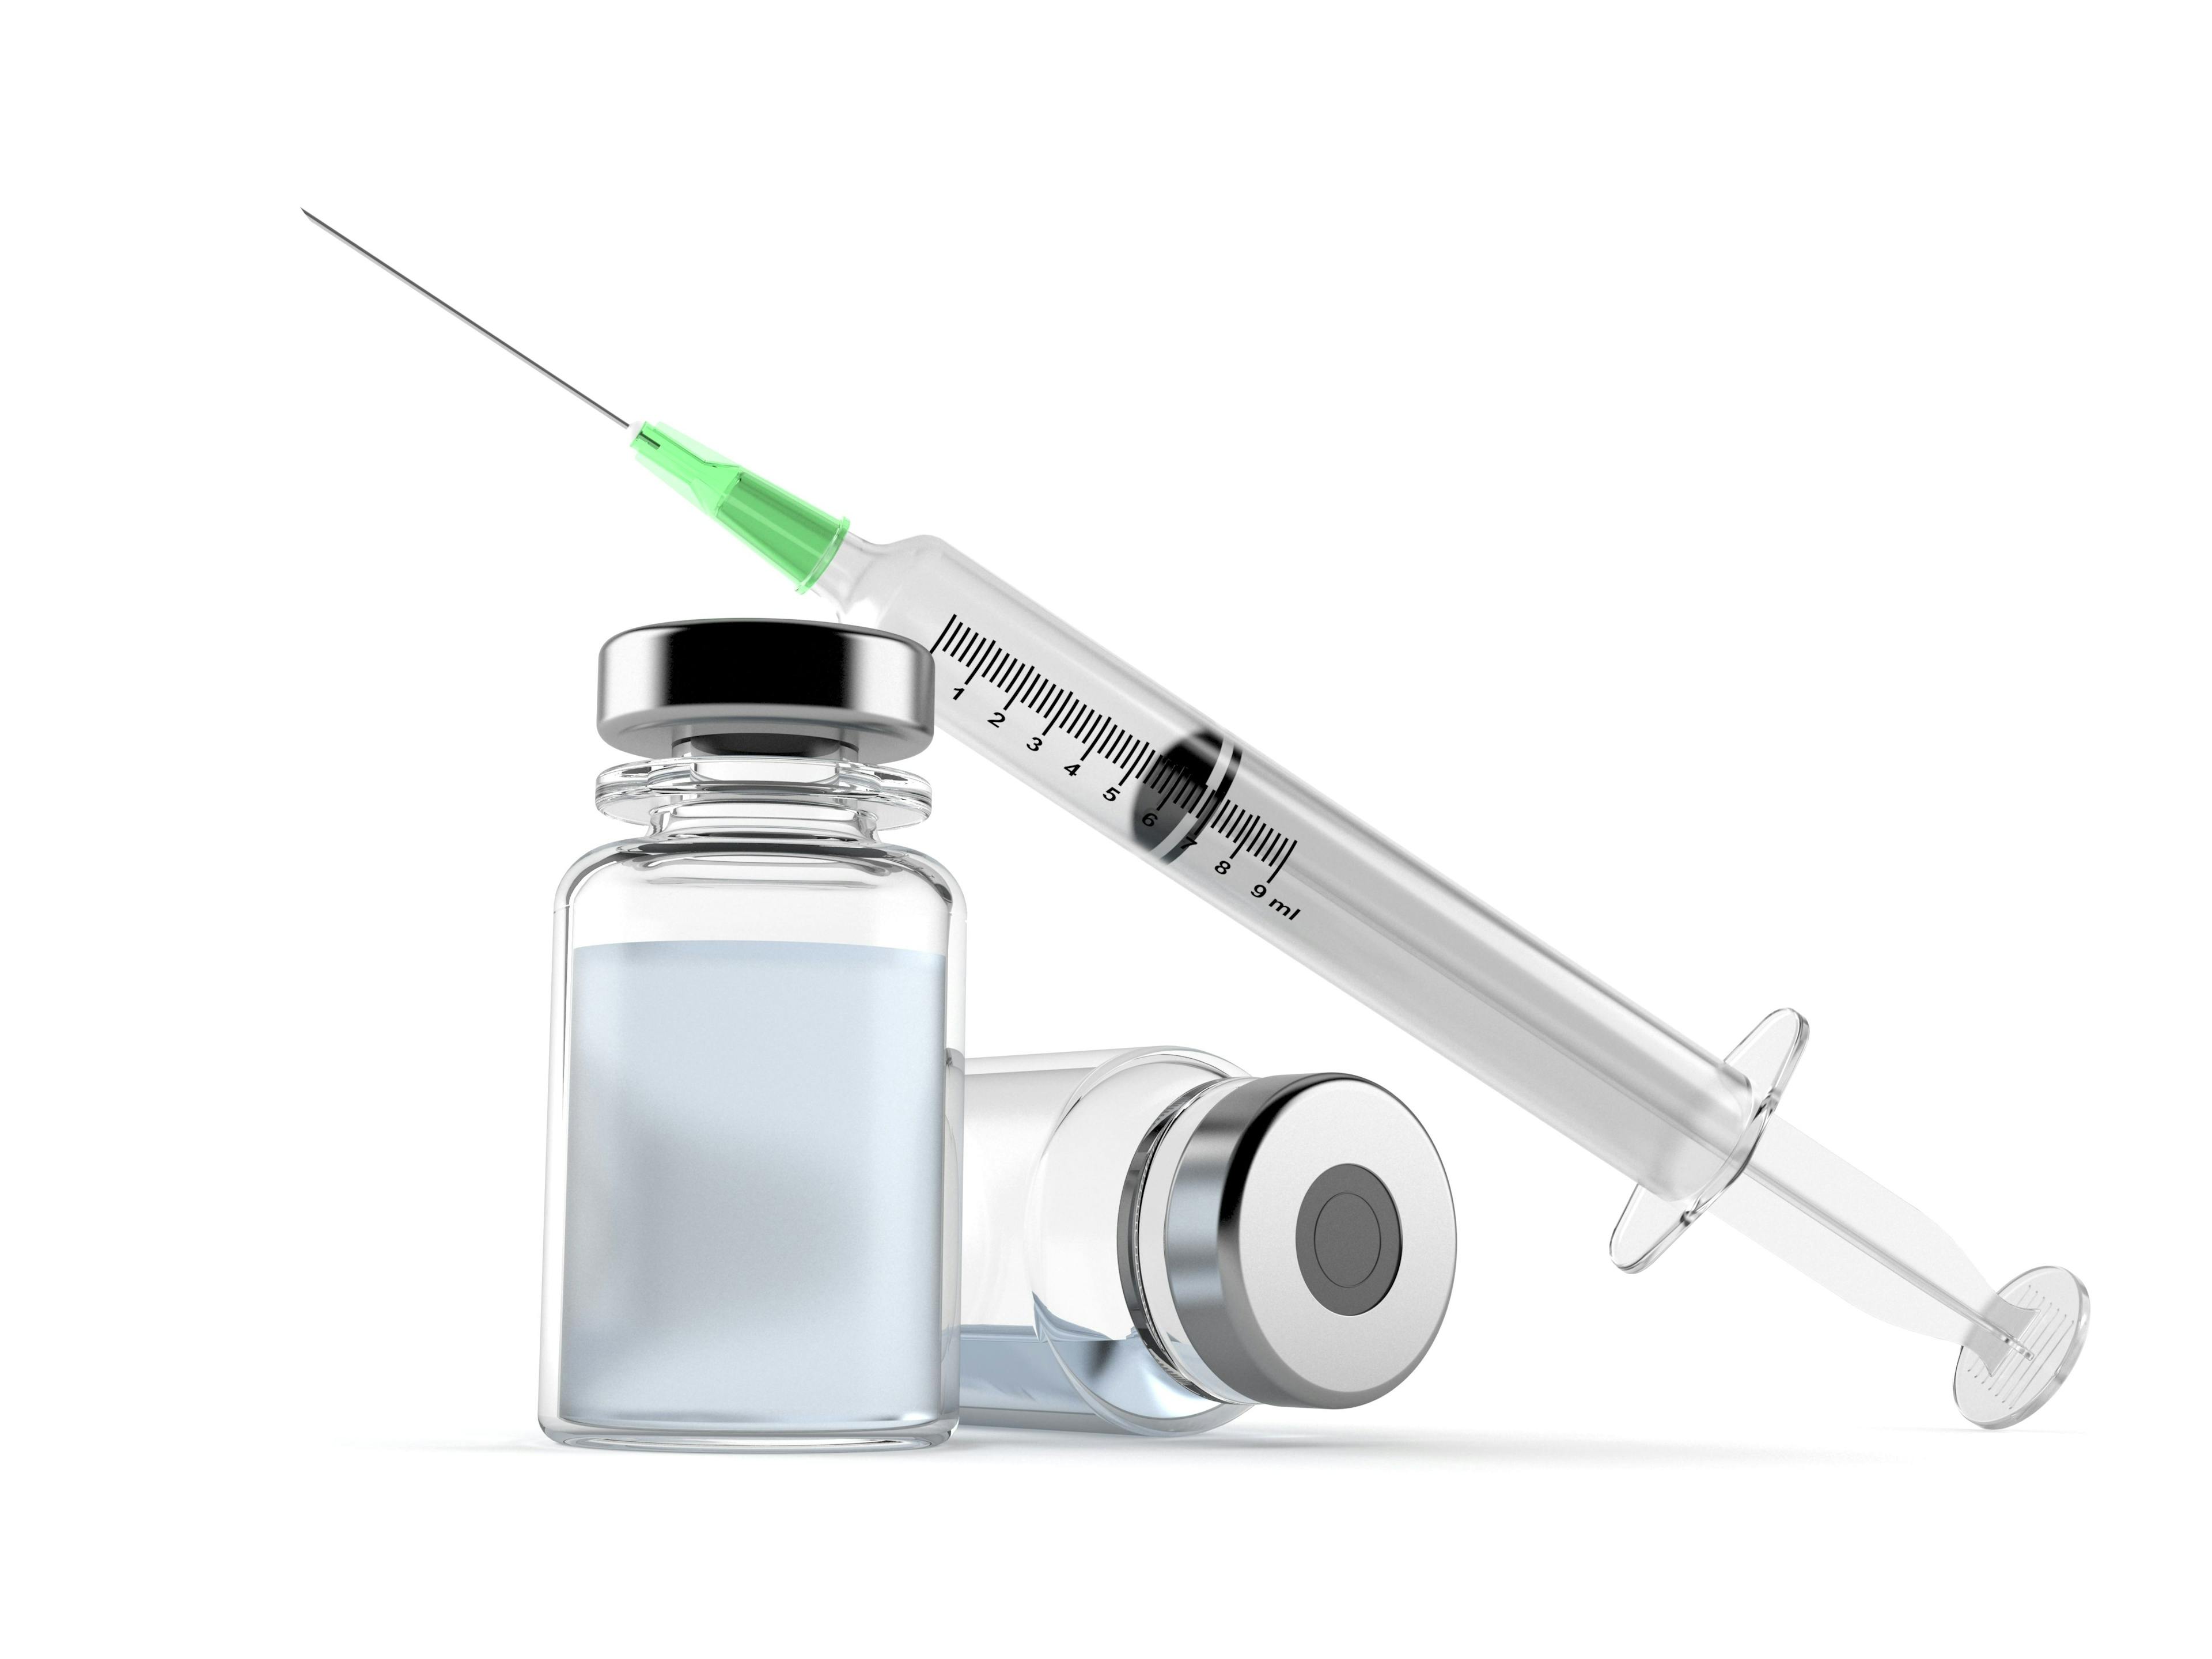 Novavax COVID-19-Influenza Combination Vaccine Candidate Shows Promise in Early Trial